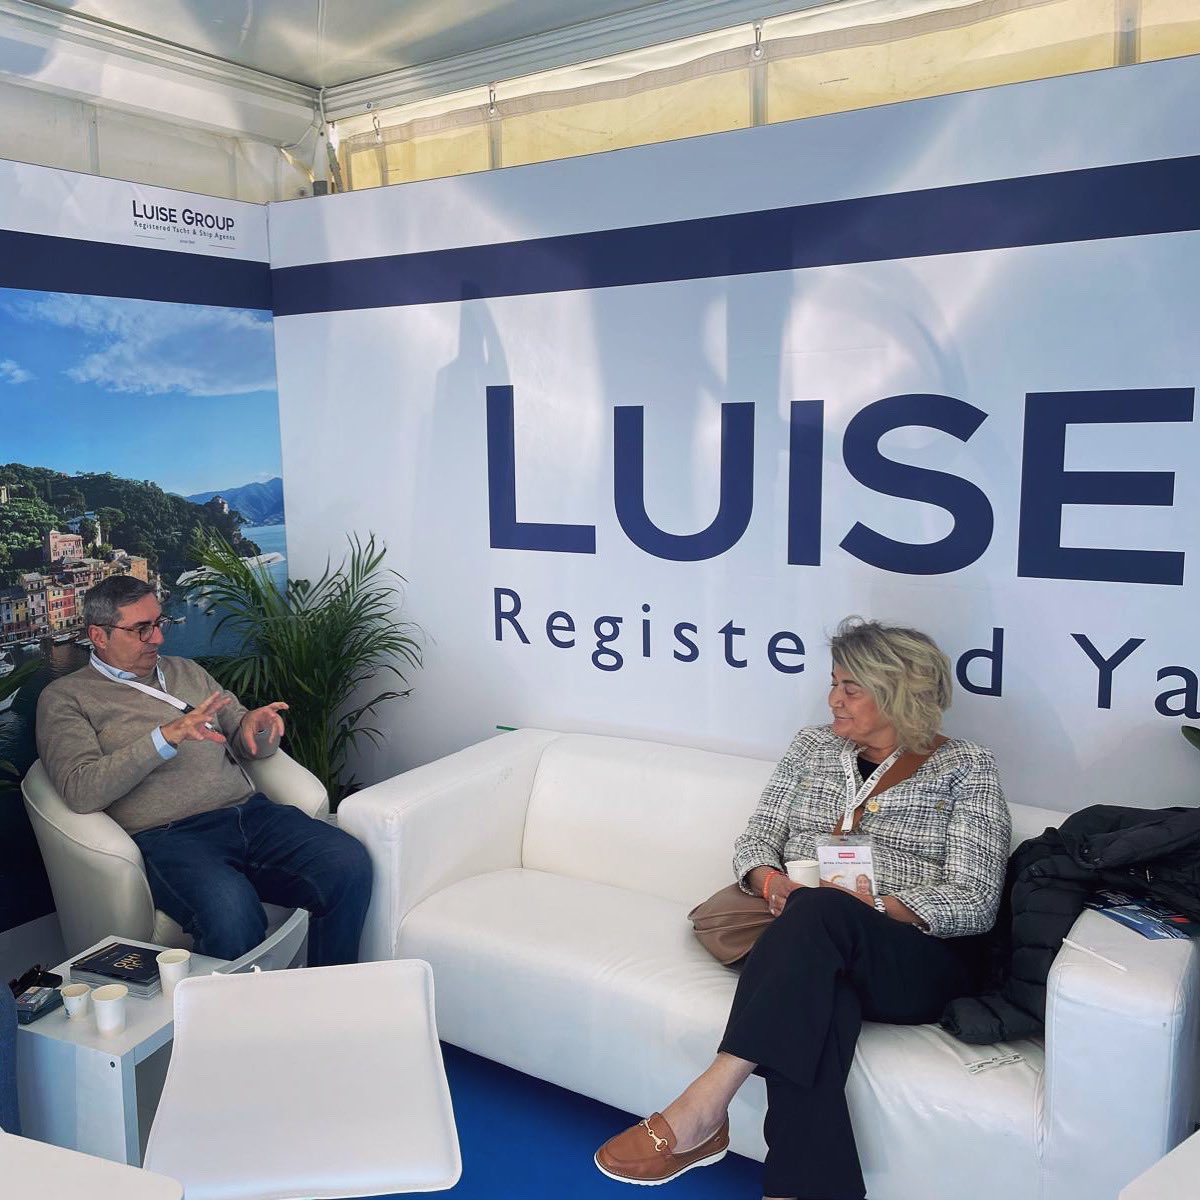 Realtime #myba #chartershow #genoa #luisegroup #team #italy #professionalyachtingservices #berthreservation #italiancoast #formalities #customs #itineraries #conciergeh24 #shipment #airports #transport #luxurycars #helicopter #medicalassistance - luise.com